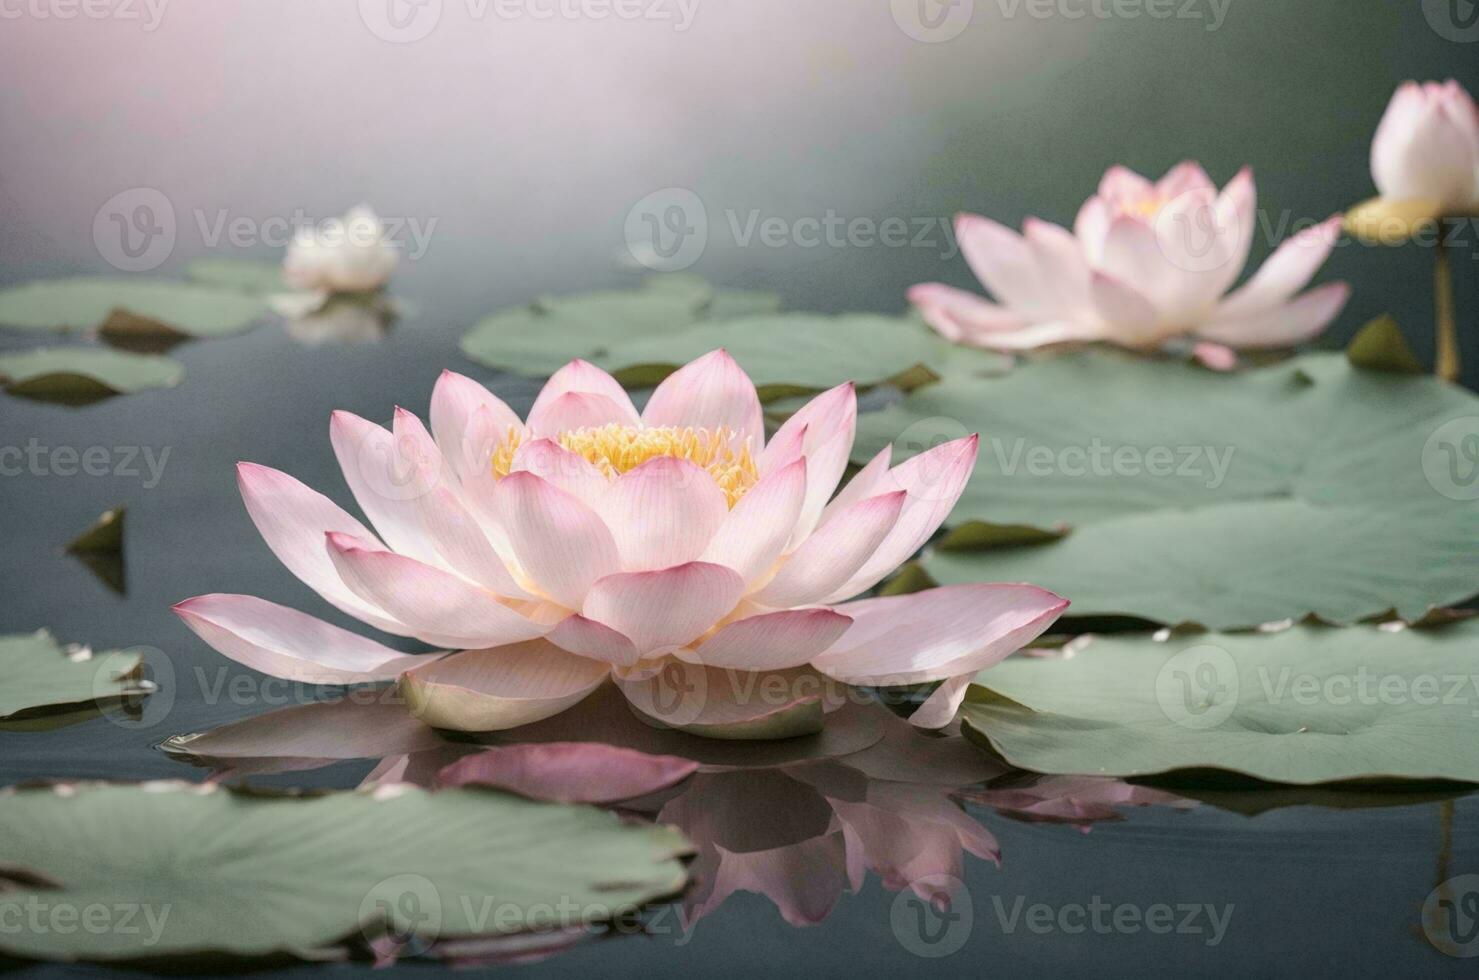 Botanical Photography of a pool in a natural setting, where the surface is adorned with delicate pink lotus flowers and lily pads. photo